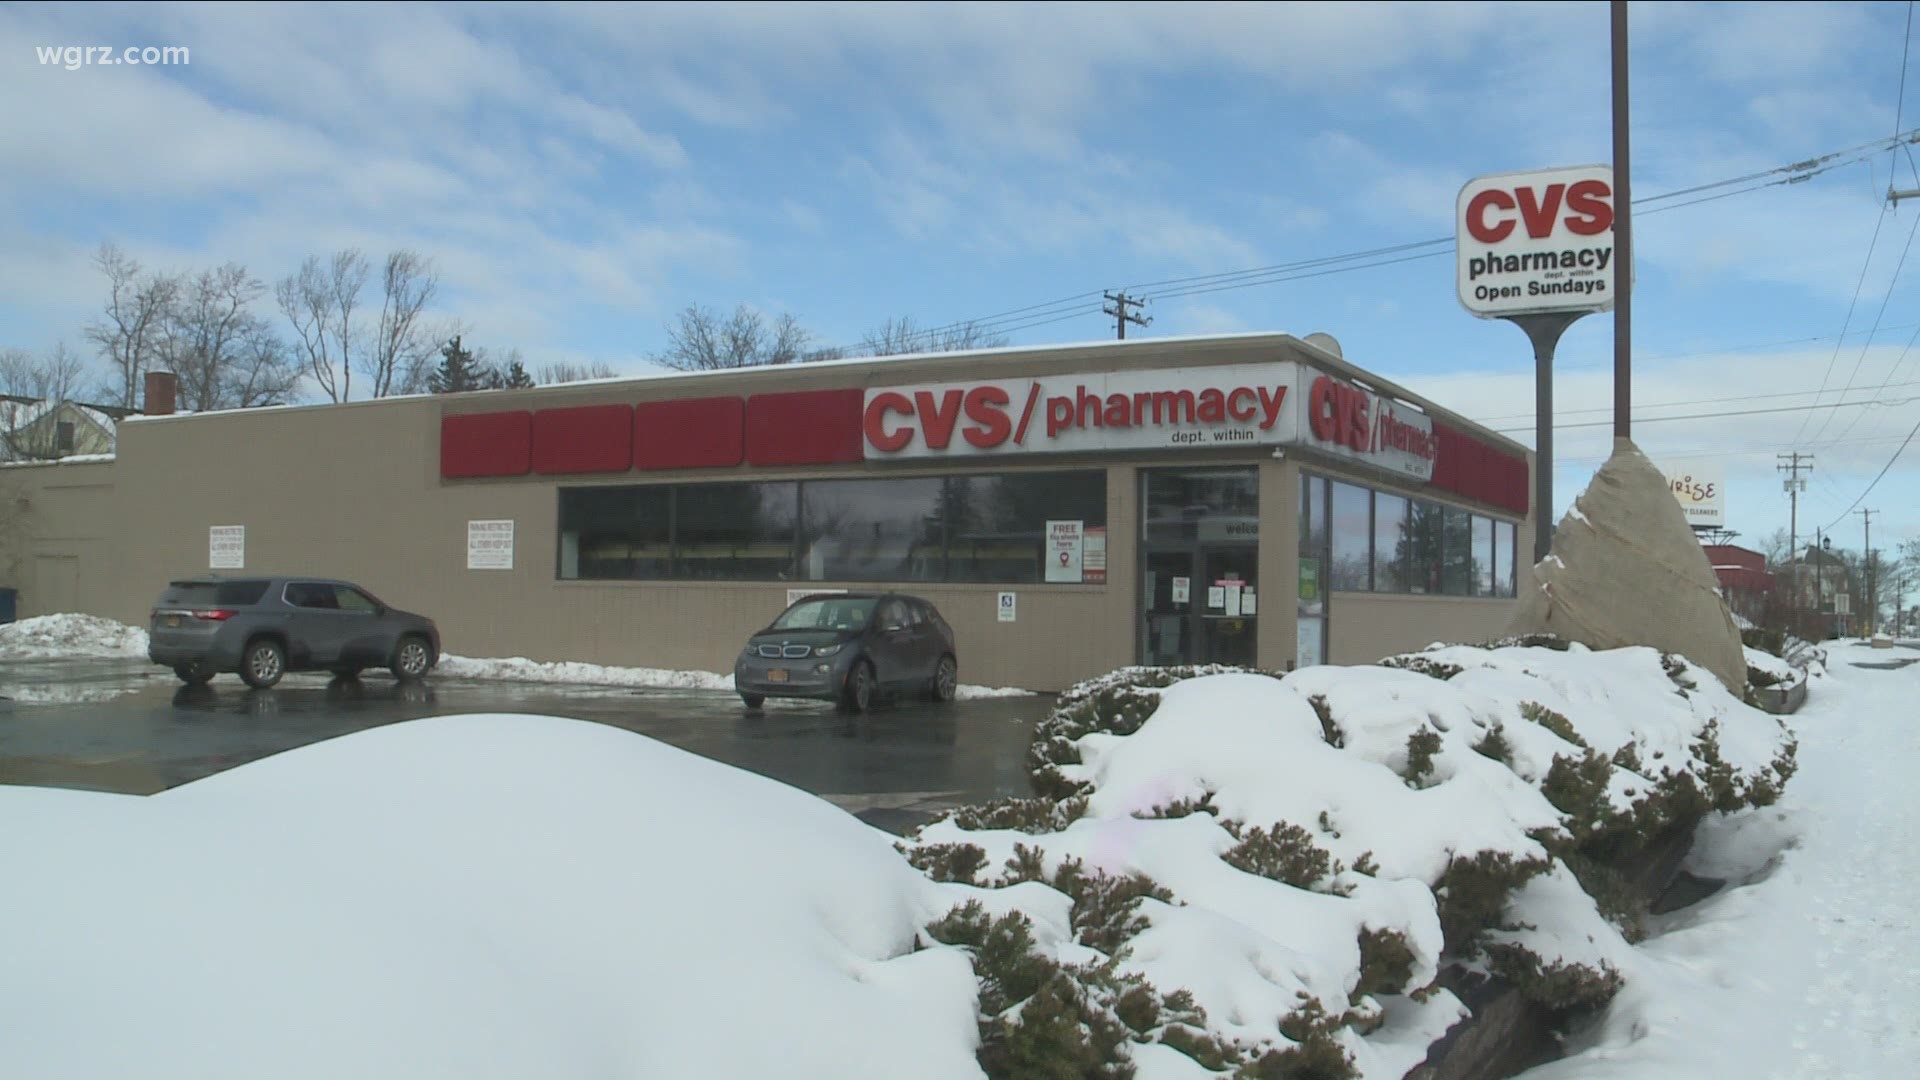 2 additional CVS stores doing vaccinations